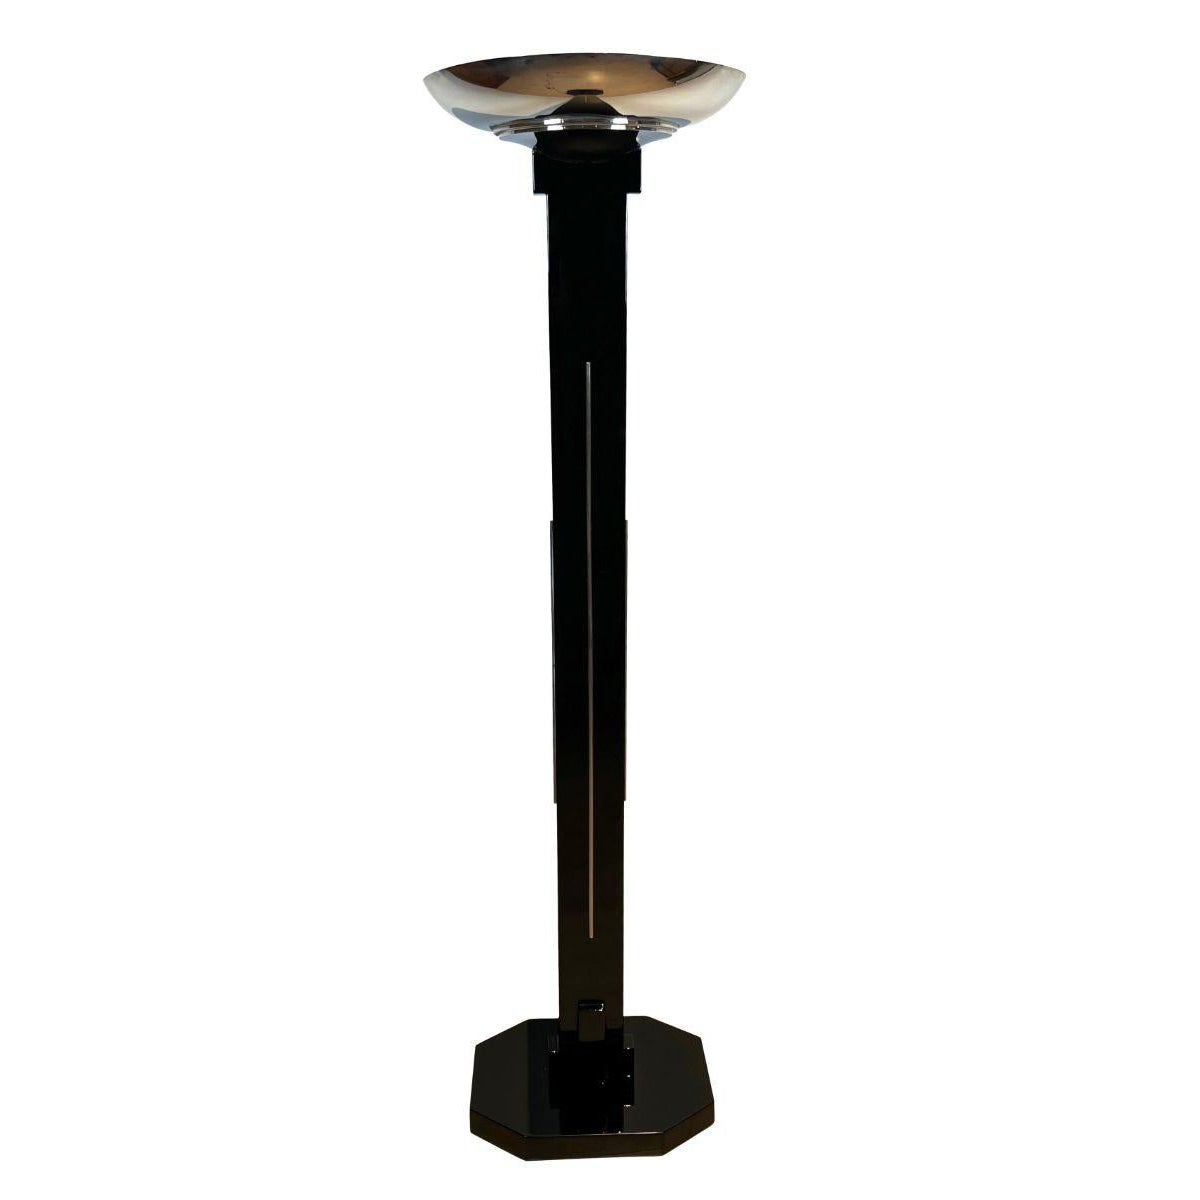 Art Deco Floor Lamp, Black Lacquer and Chrome, France circa 1930 For Sale